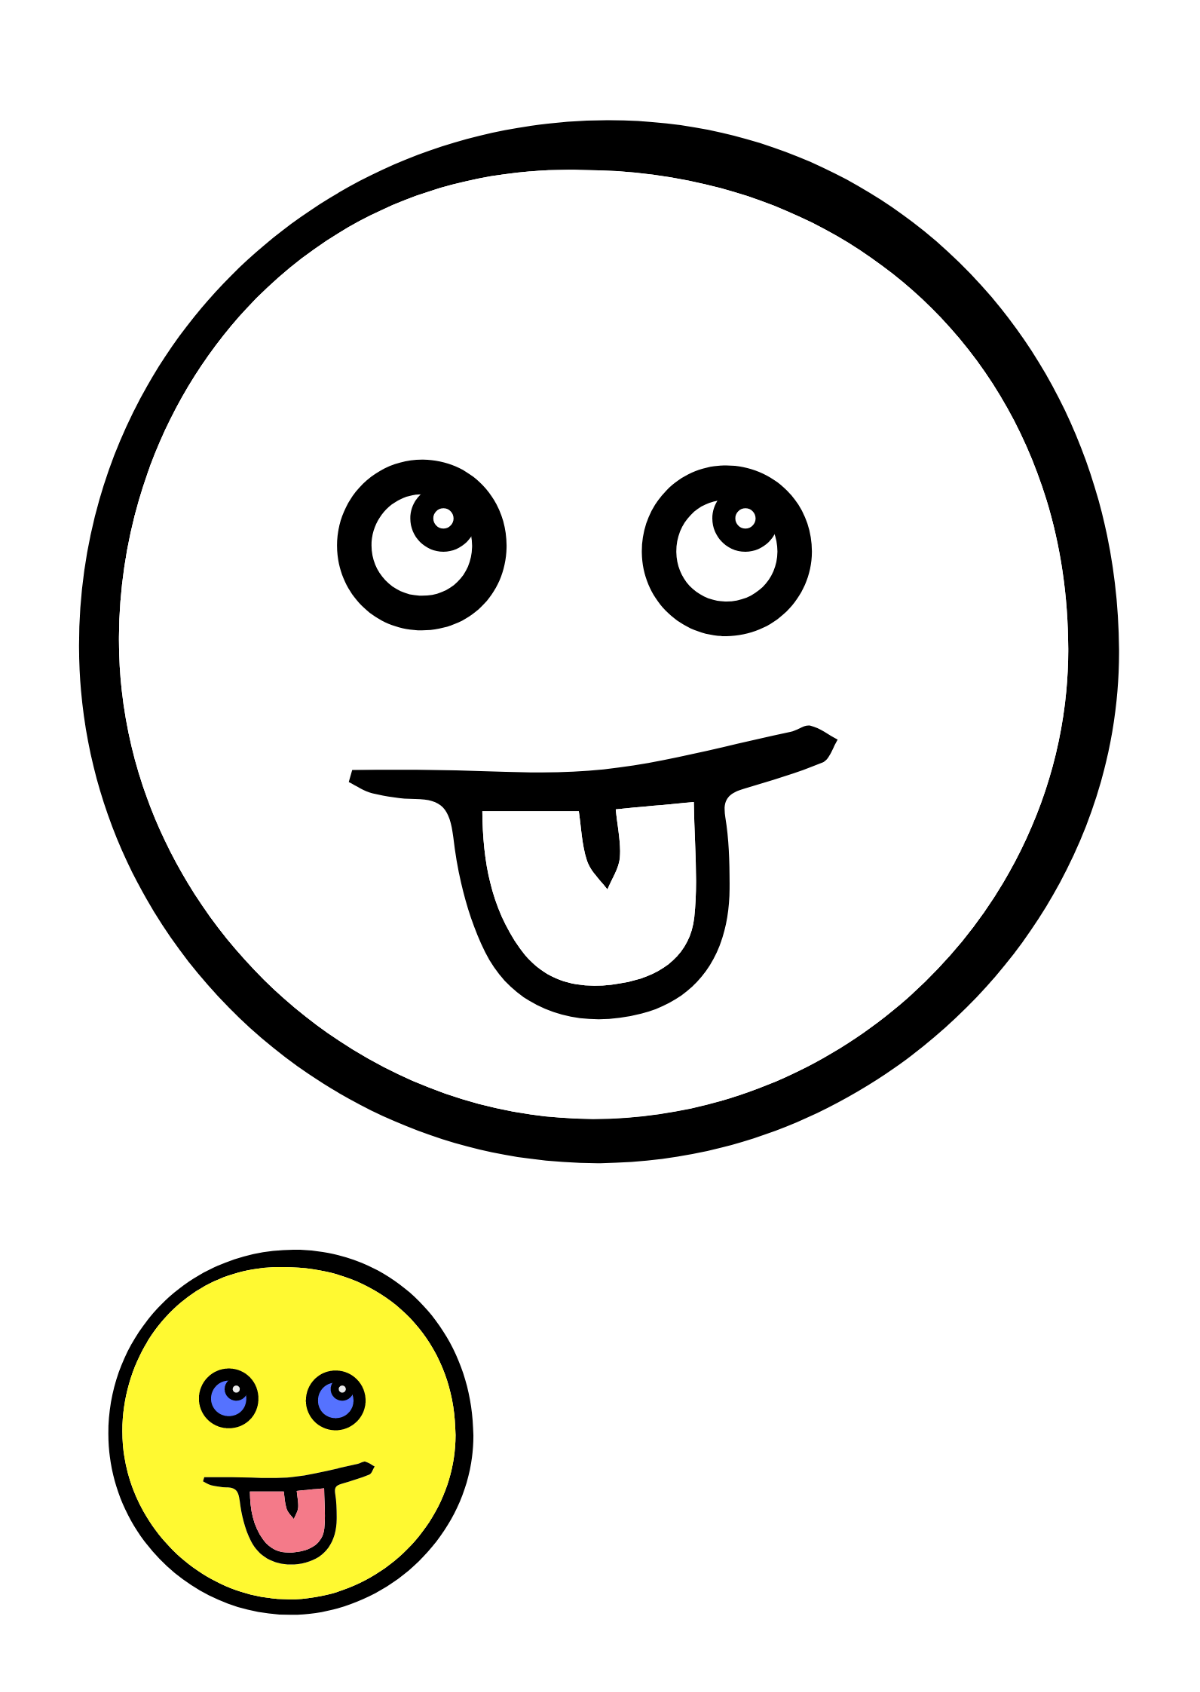 Doodle Smiley coloring page Template